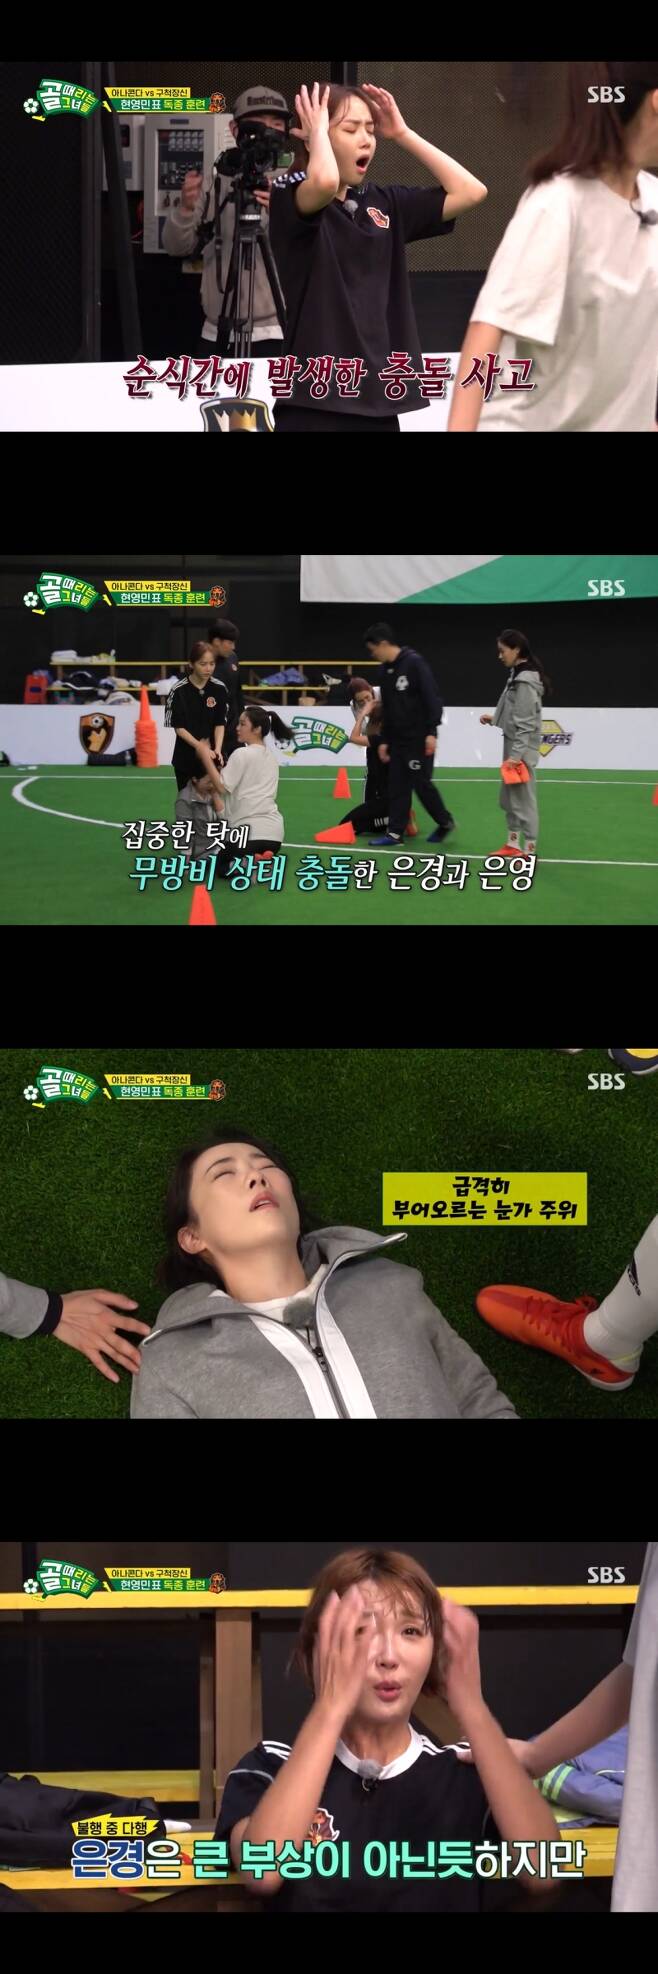 In SBS Kick a goal broadcasted on the 19th, Kang Team FC Gucheok and Kyonggi of the weakest FC Anaconda were drawn.We scored a lot of goals in the first Kyonggi and there are a lot of good players in the offensive team, so we have a lot of shooting training in preparation for FC Anaconda to come out defensively, said Baek Ji-hoon, coach of the strong team FC.FC Anaconda coach Hyun Young-min said, We played the first team, the Wonder Woman team that scored six goals and the team that scored six goals in Kyonggi.The team of Anaconda, who was in the training of the former Kyonggi with the old master, was on red light from the beginning. Park Eun-young and Choi Eun-kyung collided in a defenseless state.Park Eun-youngs eyes swelled sharply, heightening tension.Chois injuries were not severe, but he was worried about Park Eun-young, What do you do with her bruises?Park Eun-young said, I am sorry for the time now, and laughed, I will be here and train.